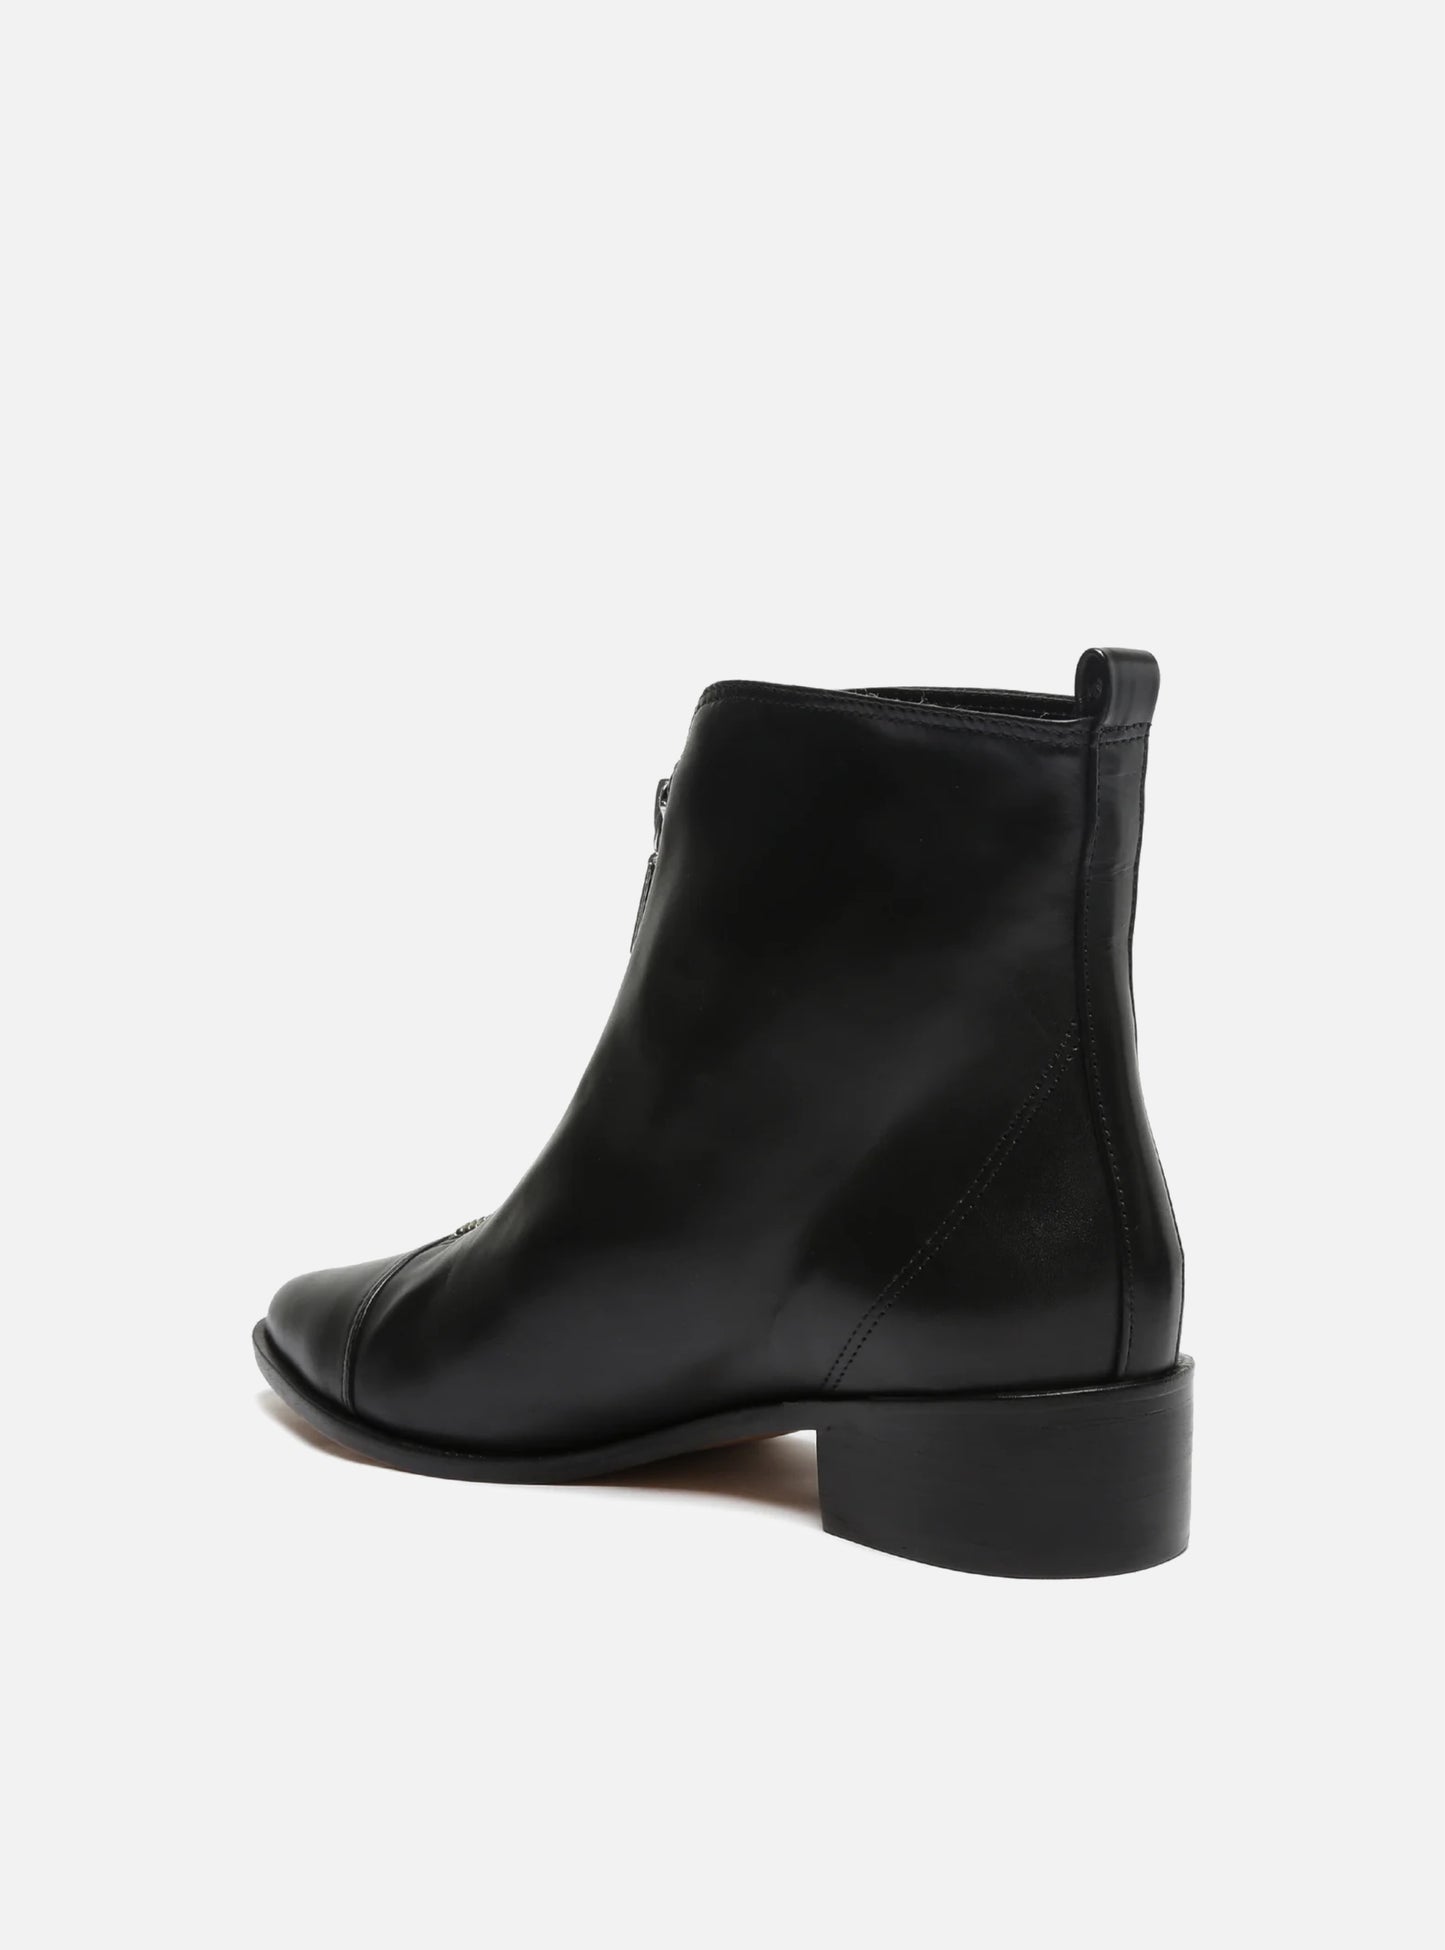 Steph Leather Bootie